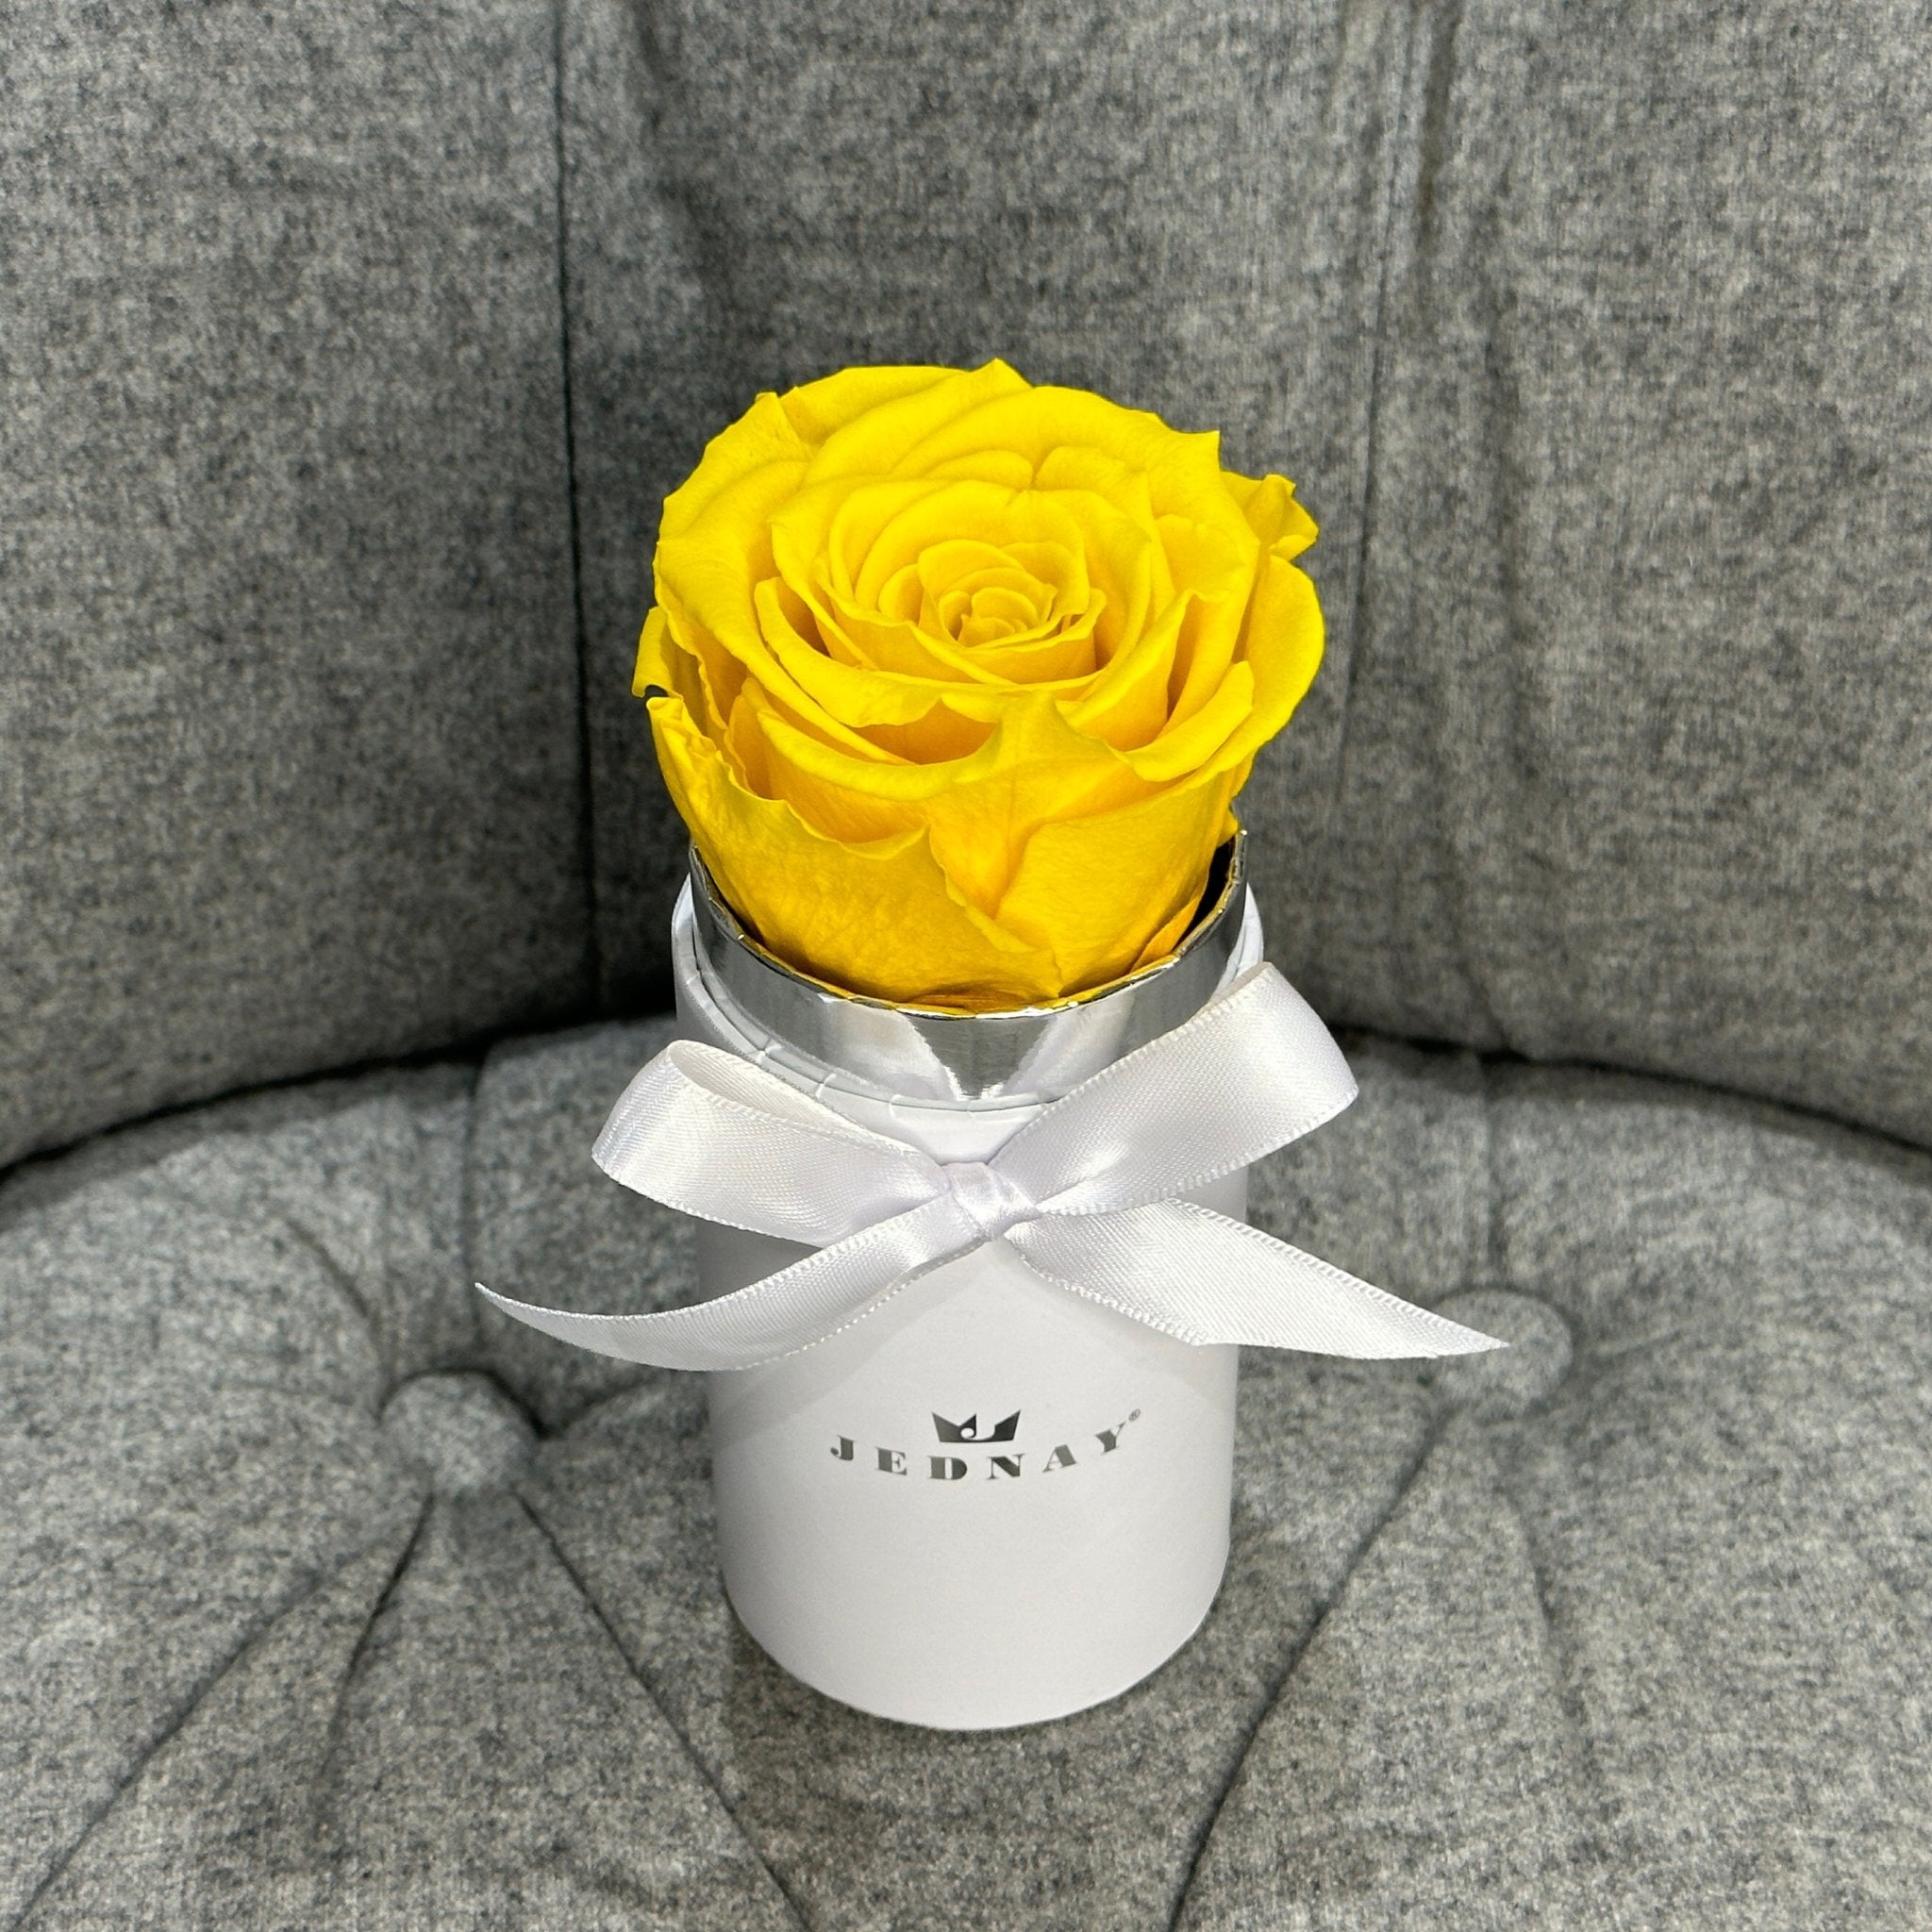 The Uno - Sunshine Yellow Eternal Rose - Classic White Box - Jednay Roses